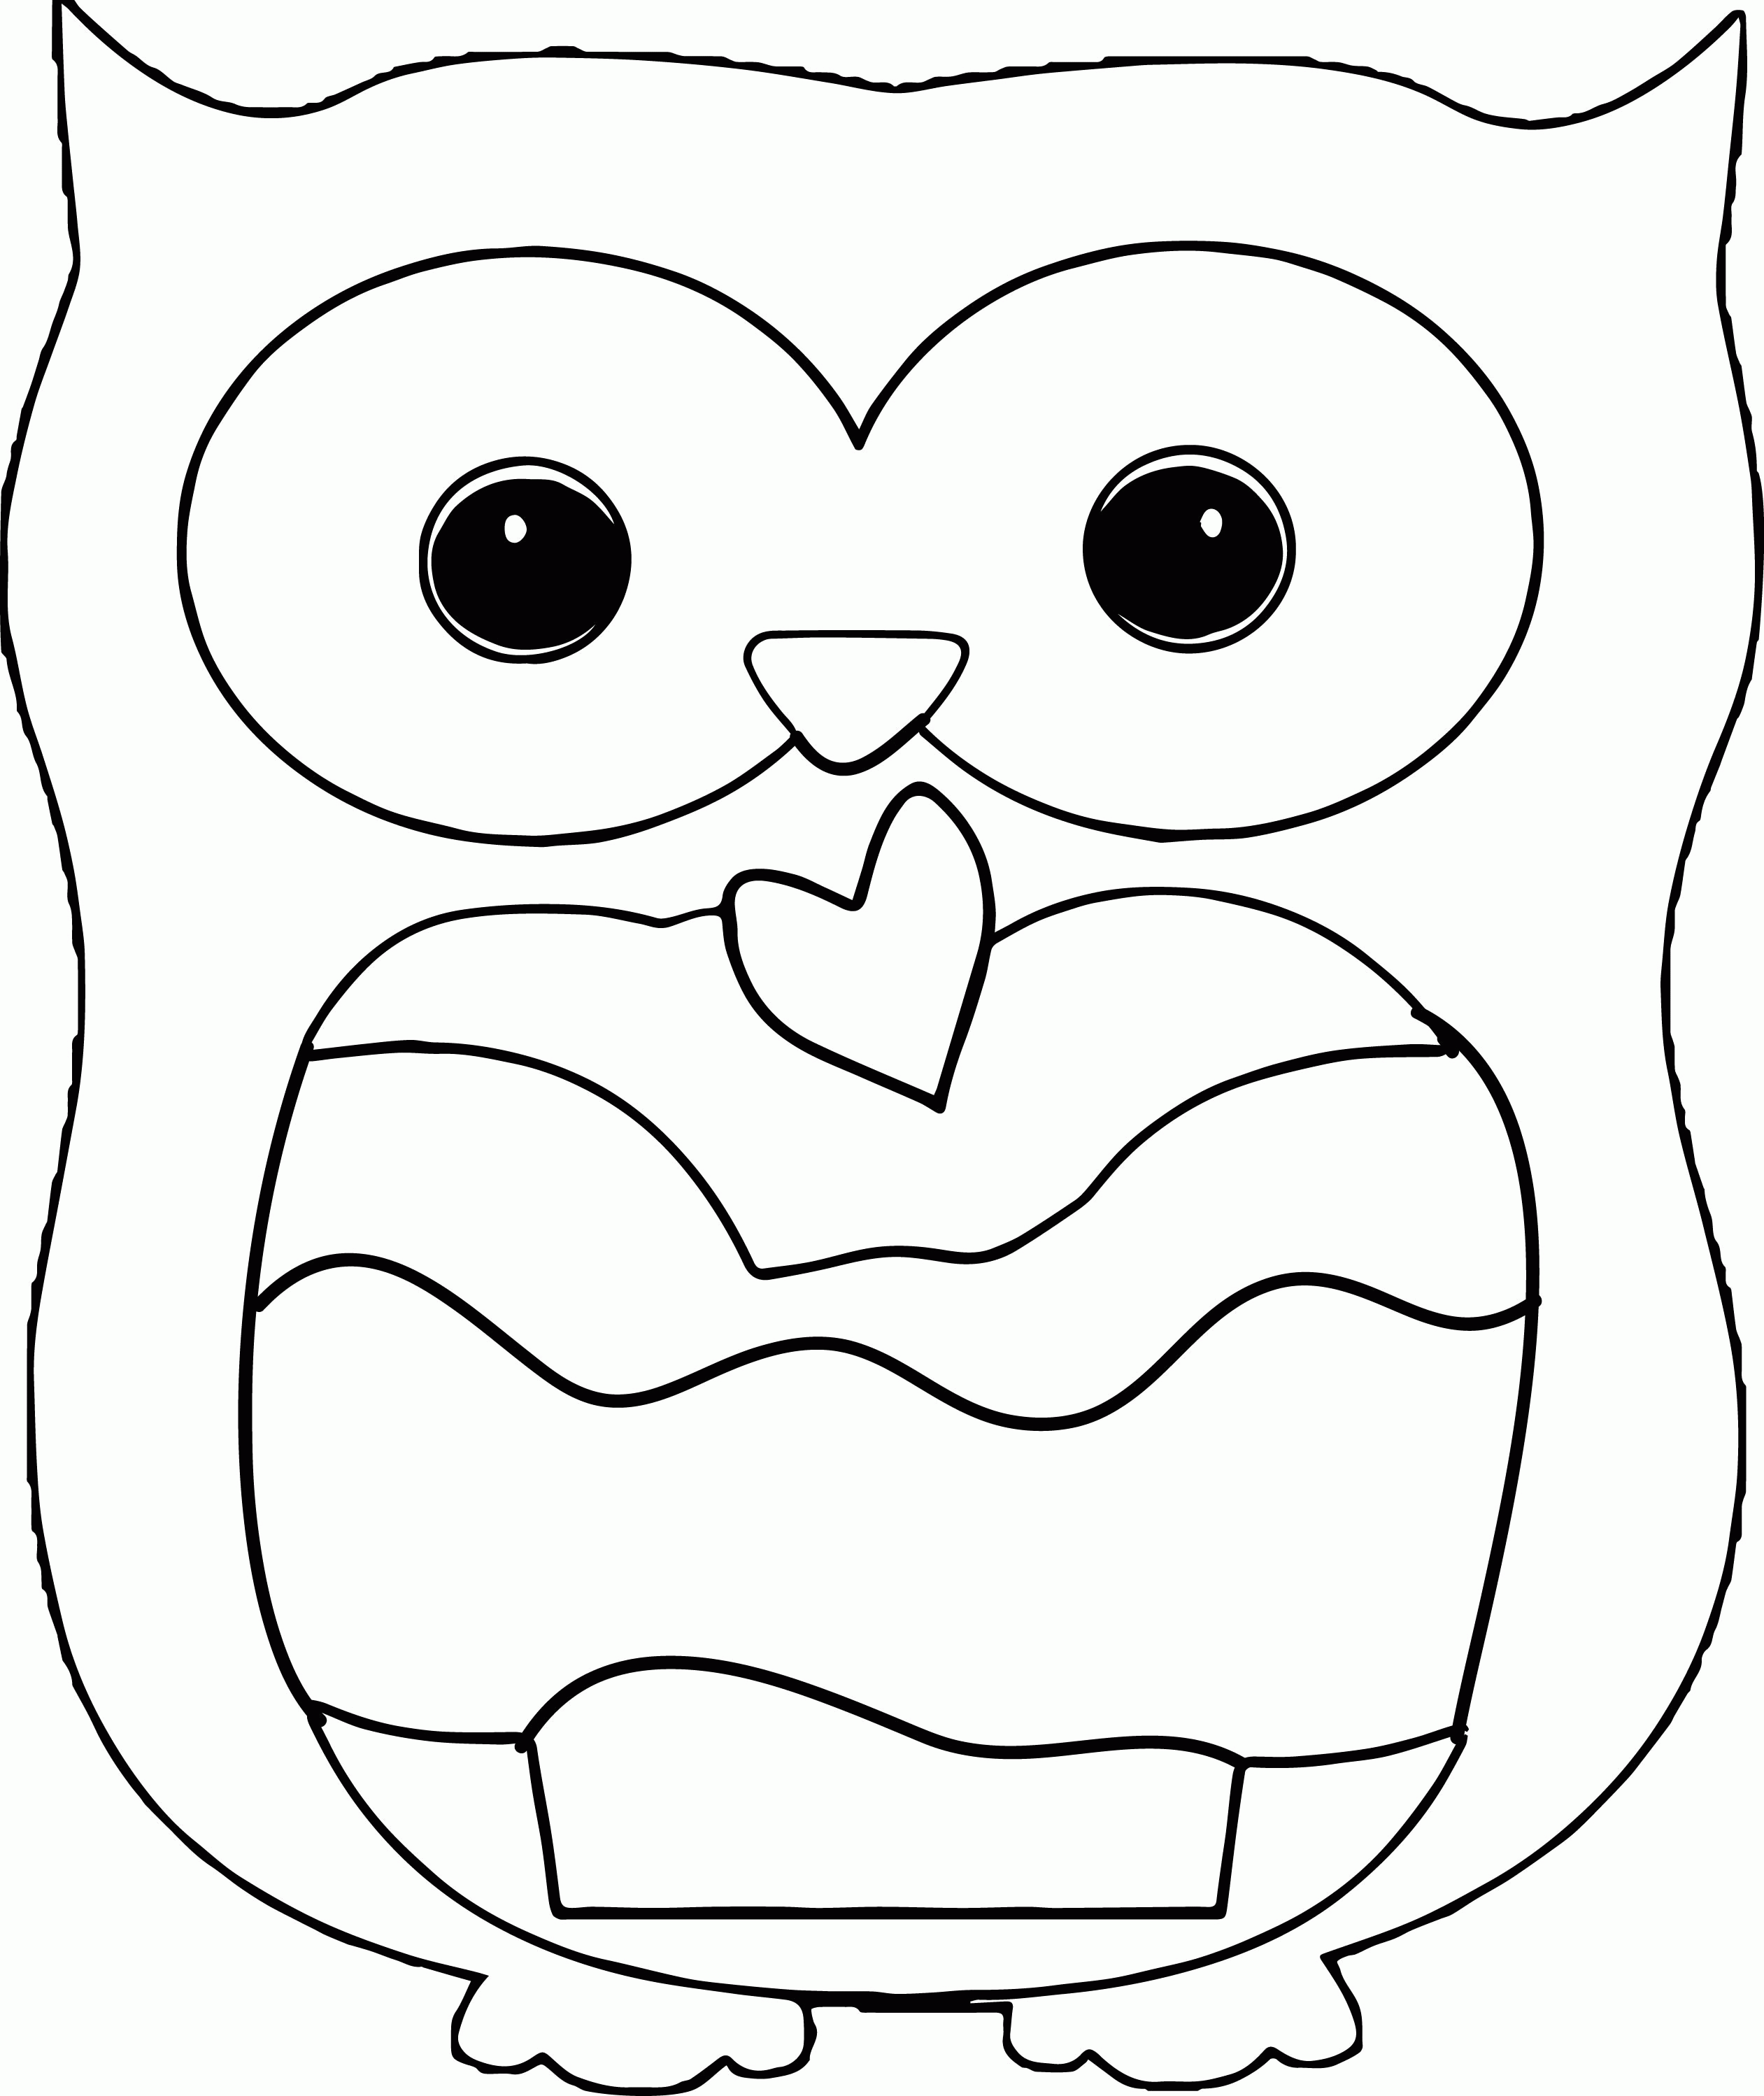 Download Cute Cupcakes Coloring Pages - Coloring Home